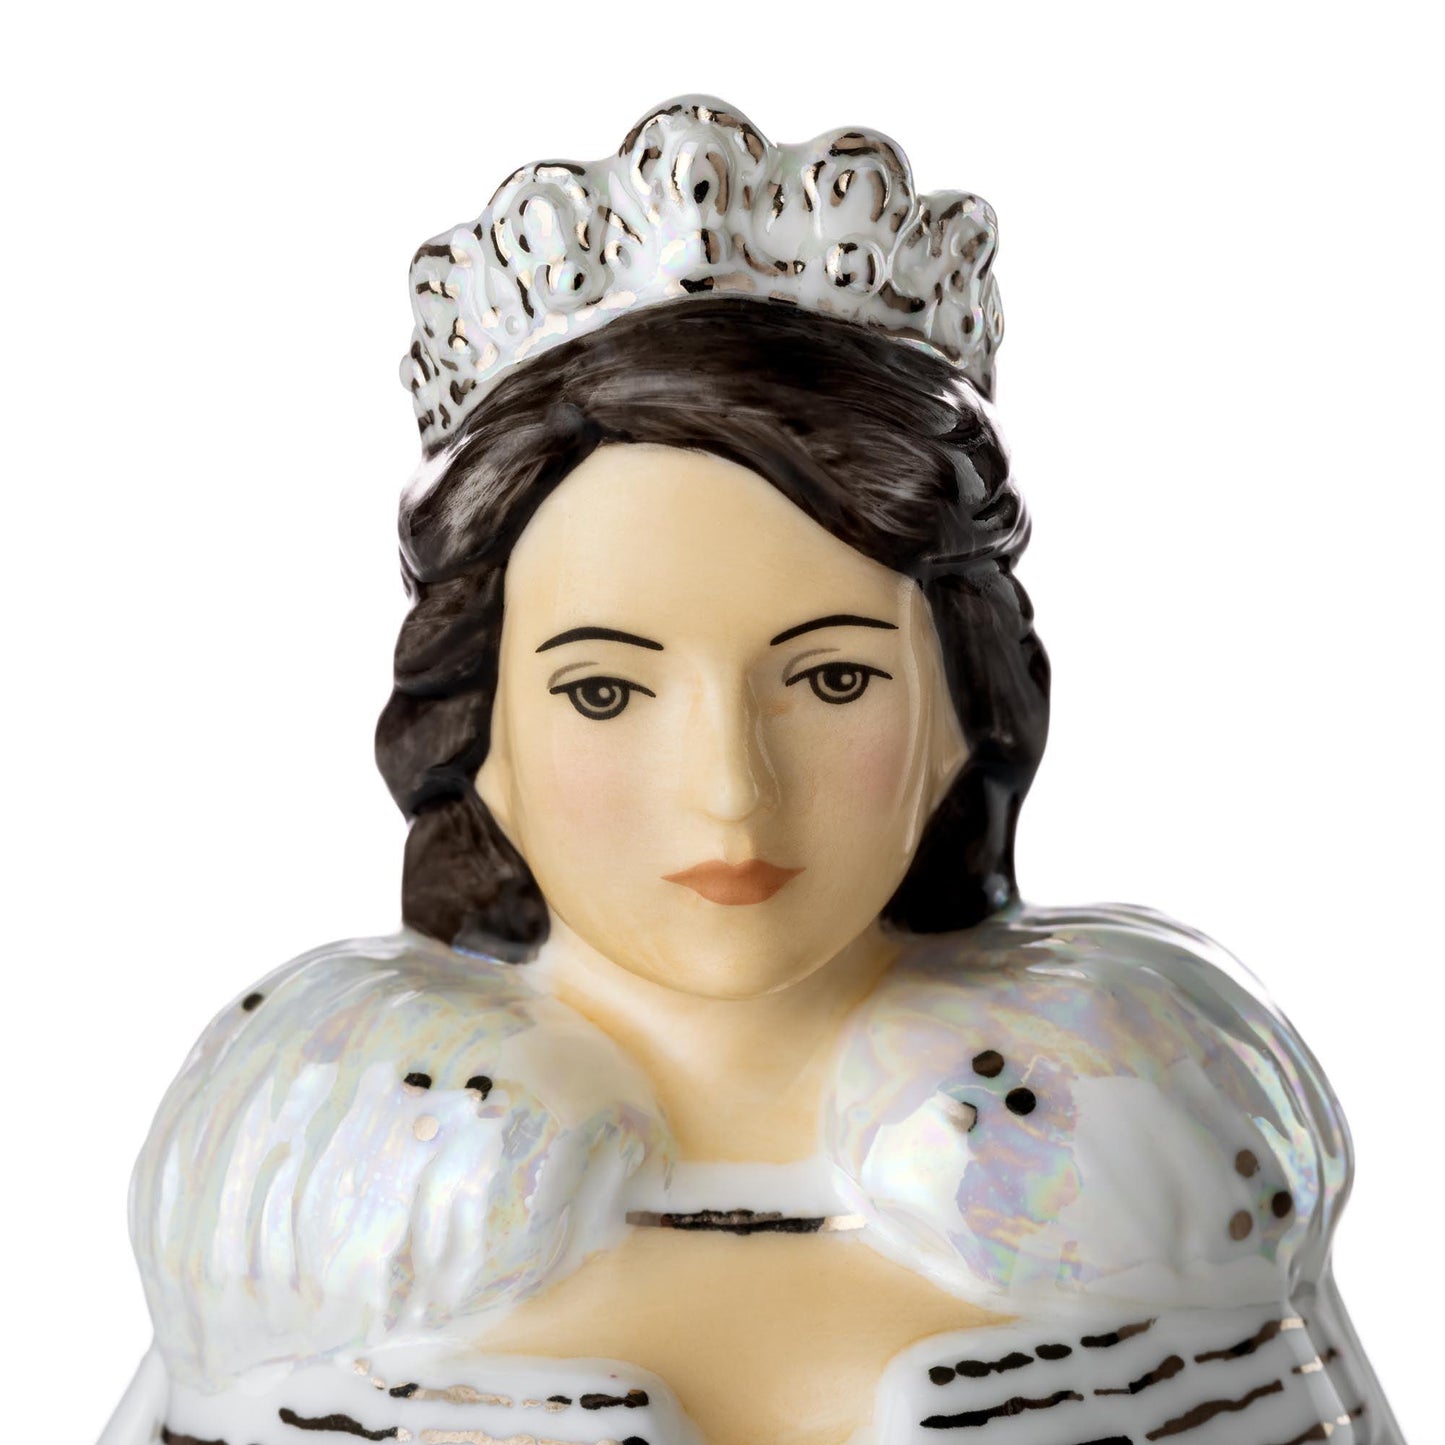 Gypsy Princess Brunette (English Ladies Co) - Gallery Gifts Online 